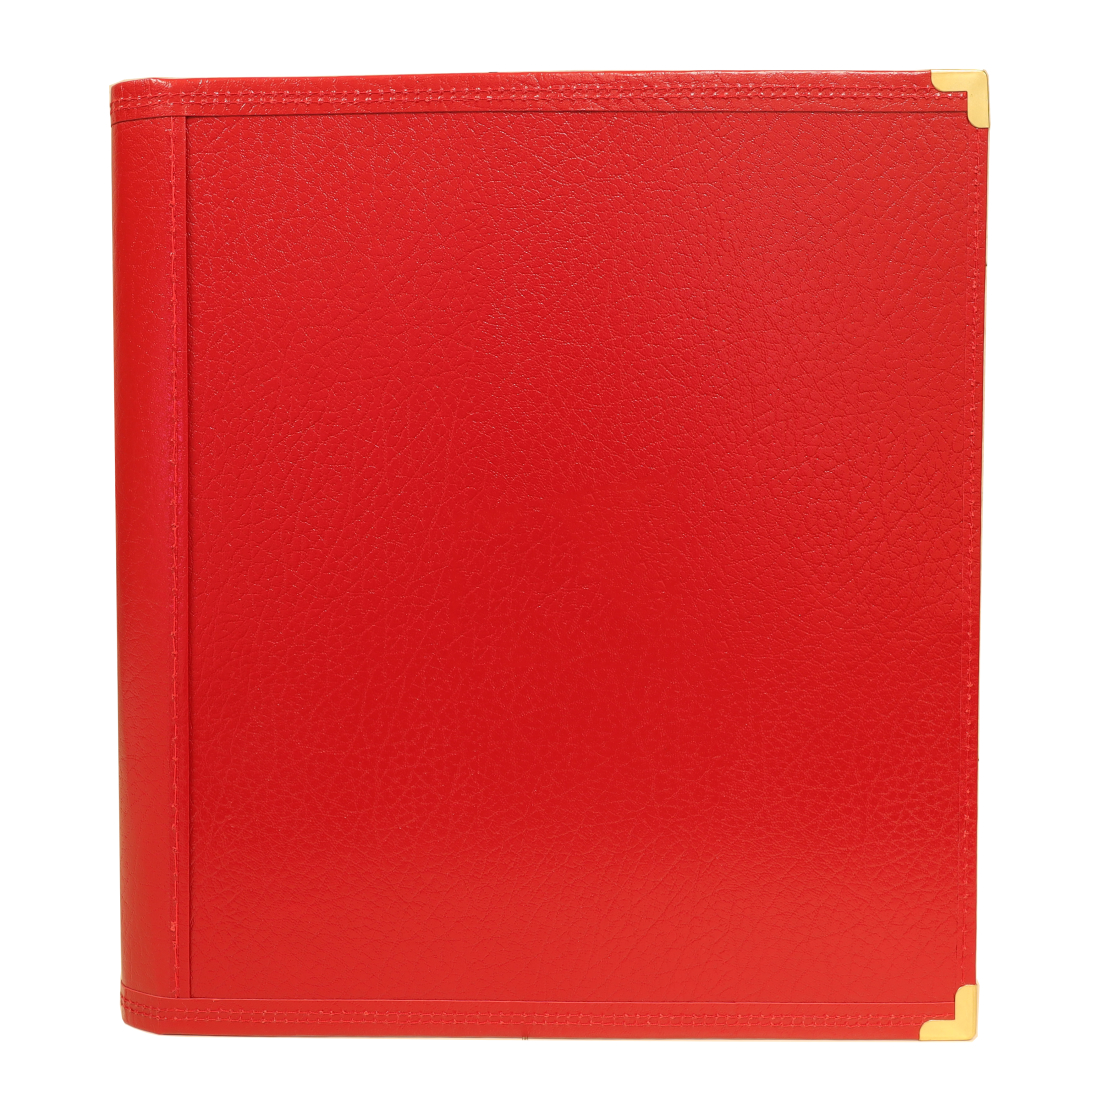 Deluxe Band Folder with Pencil Pockets (Red)